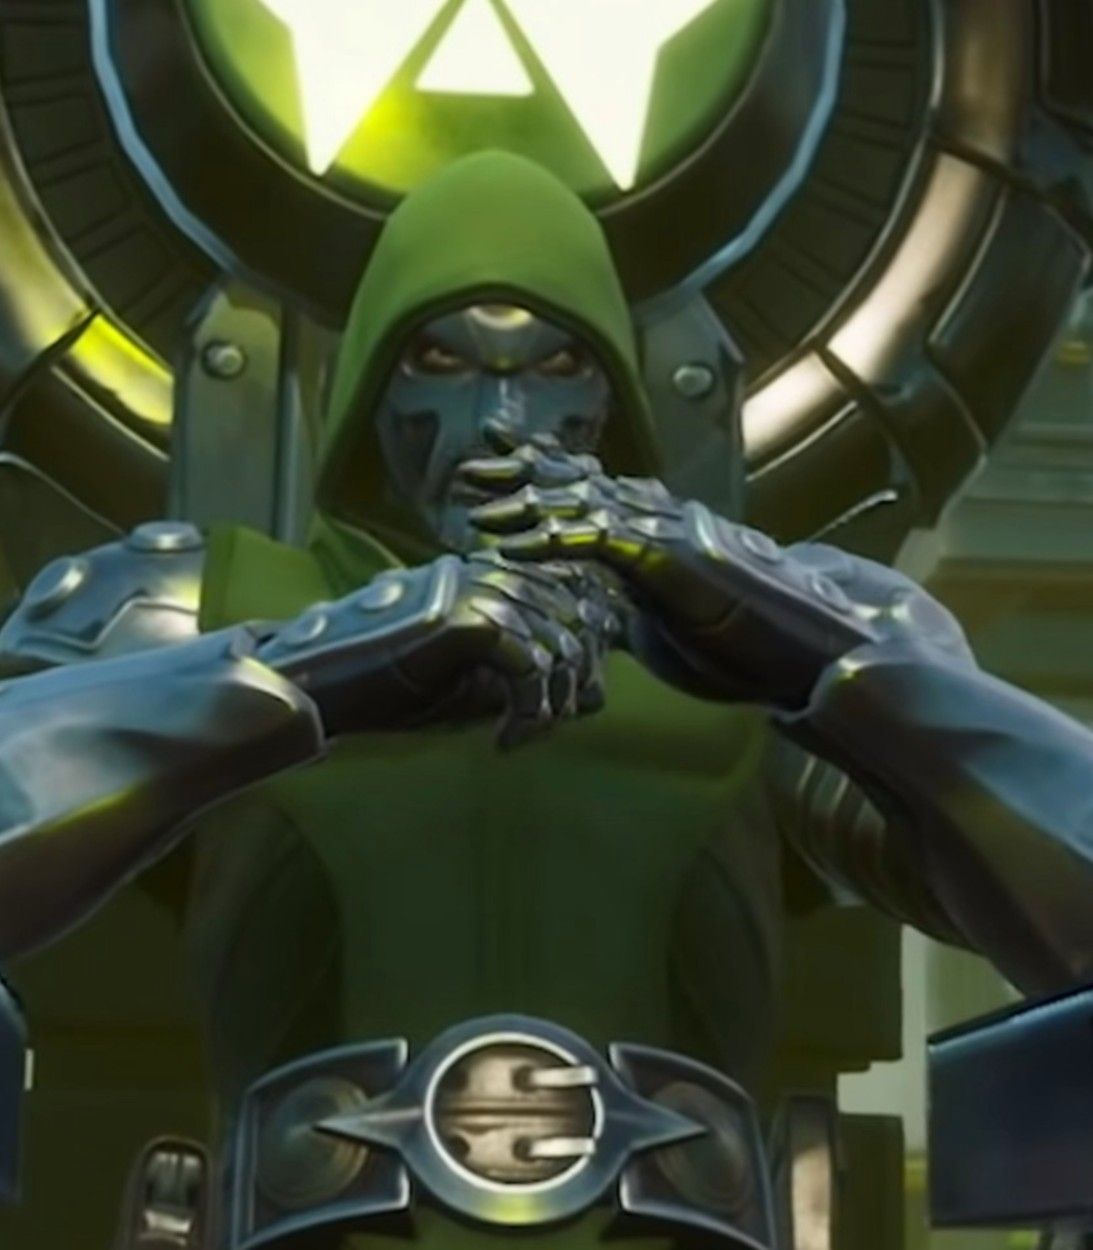 Players can unlock the Victory von Doom emote of Dr. Doom on his throne in Fortnite Season 4